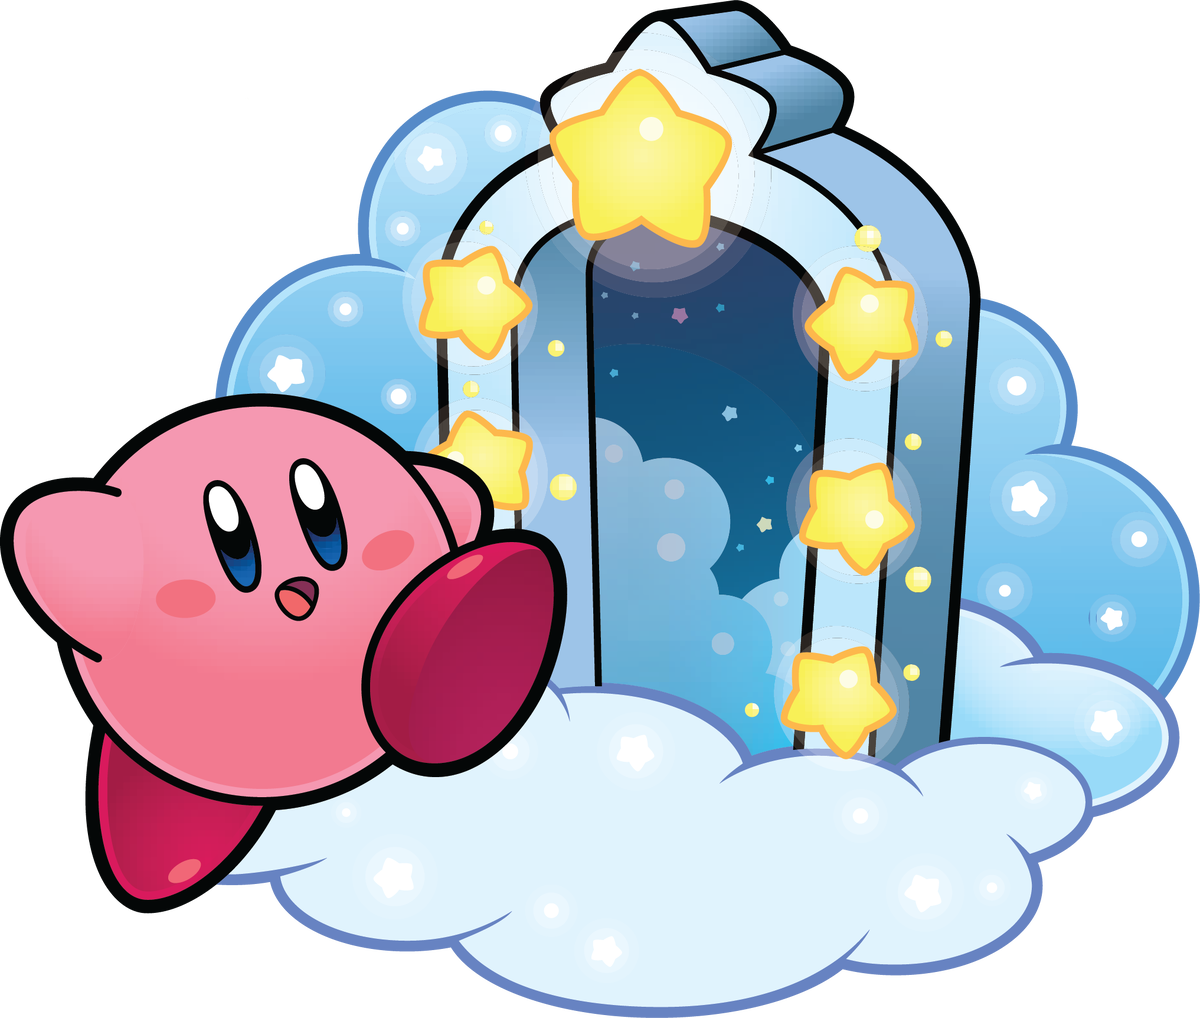 Kirby and the Forgotten Land Manual